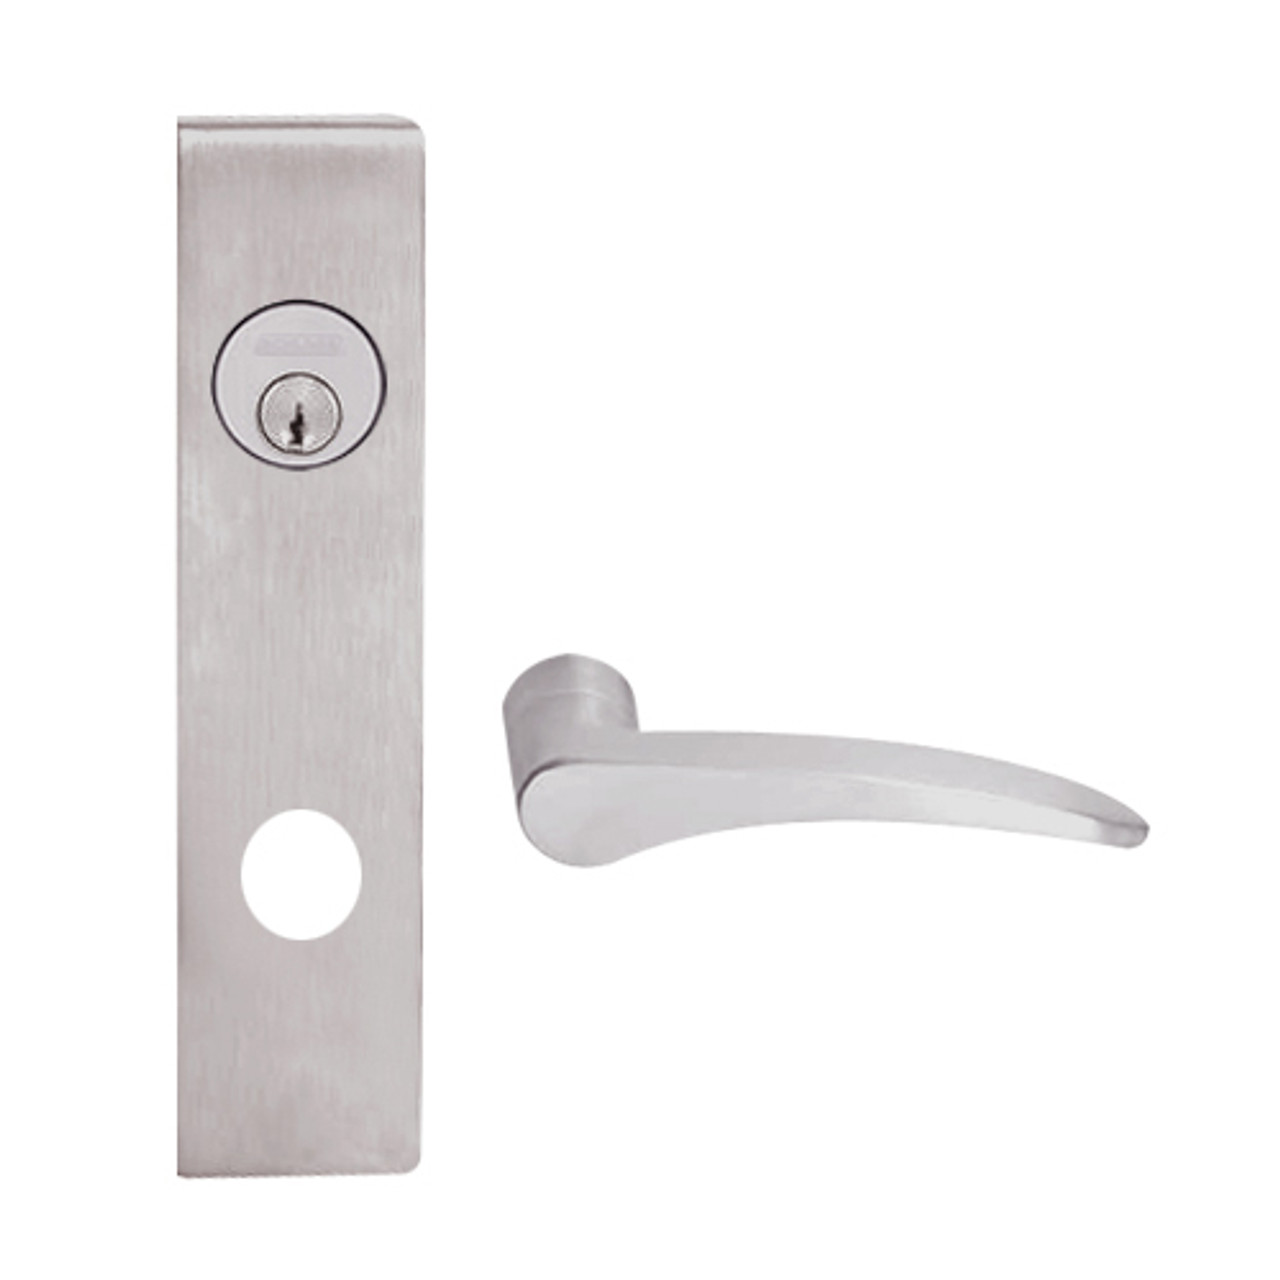 L9453L-12L-630-RH Schlage L Series Less Cylinder Entrance with Deadbolt Commercial Mortise Lock with 12 Cast Lever Design in Satin Stainless Steel